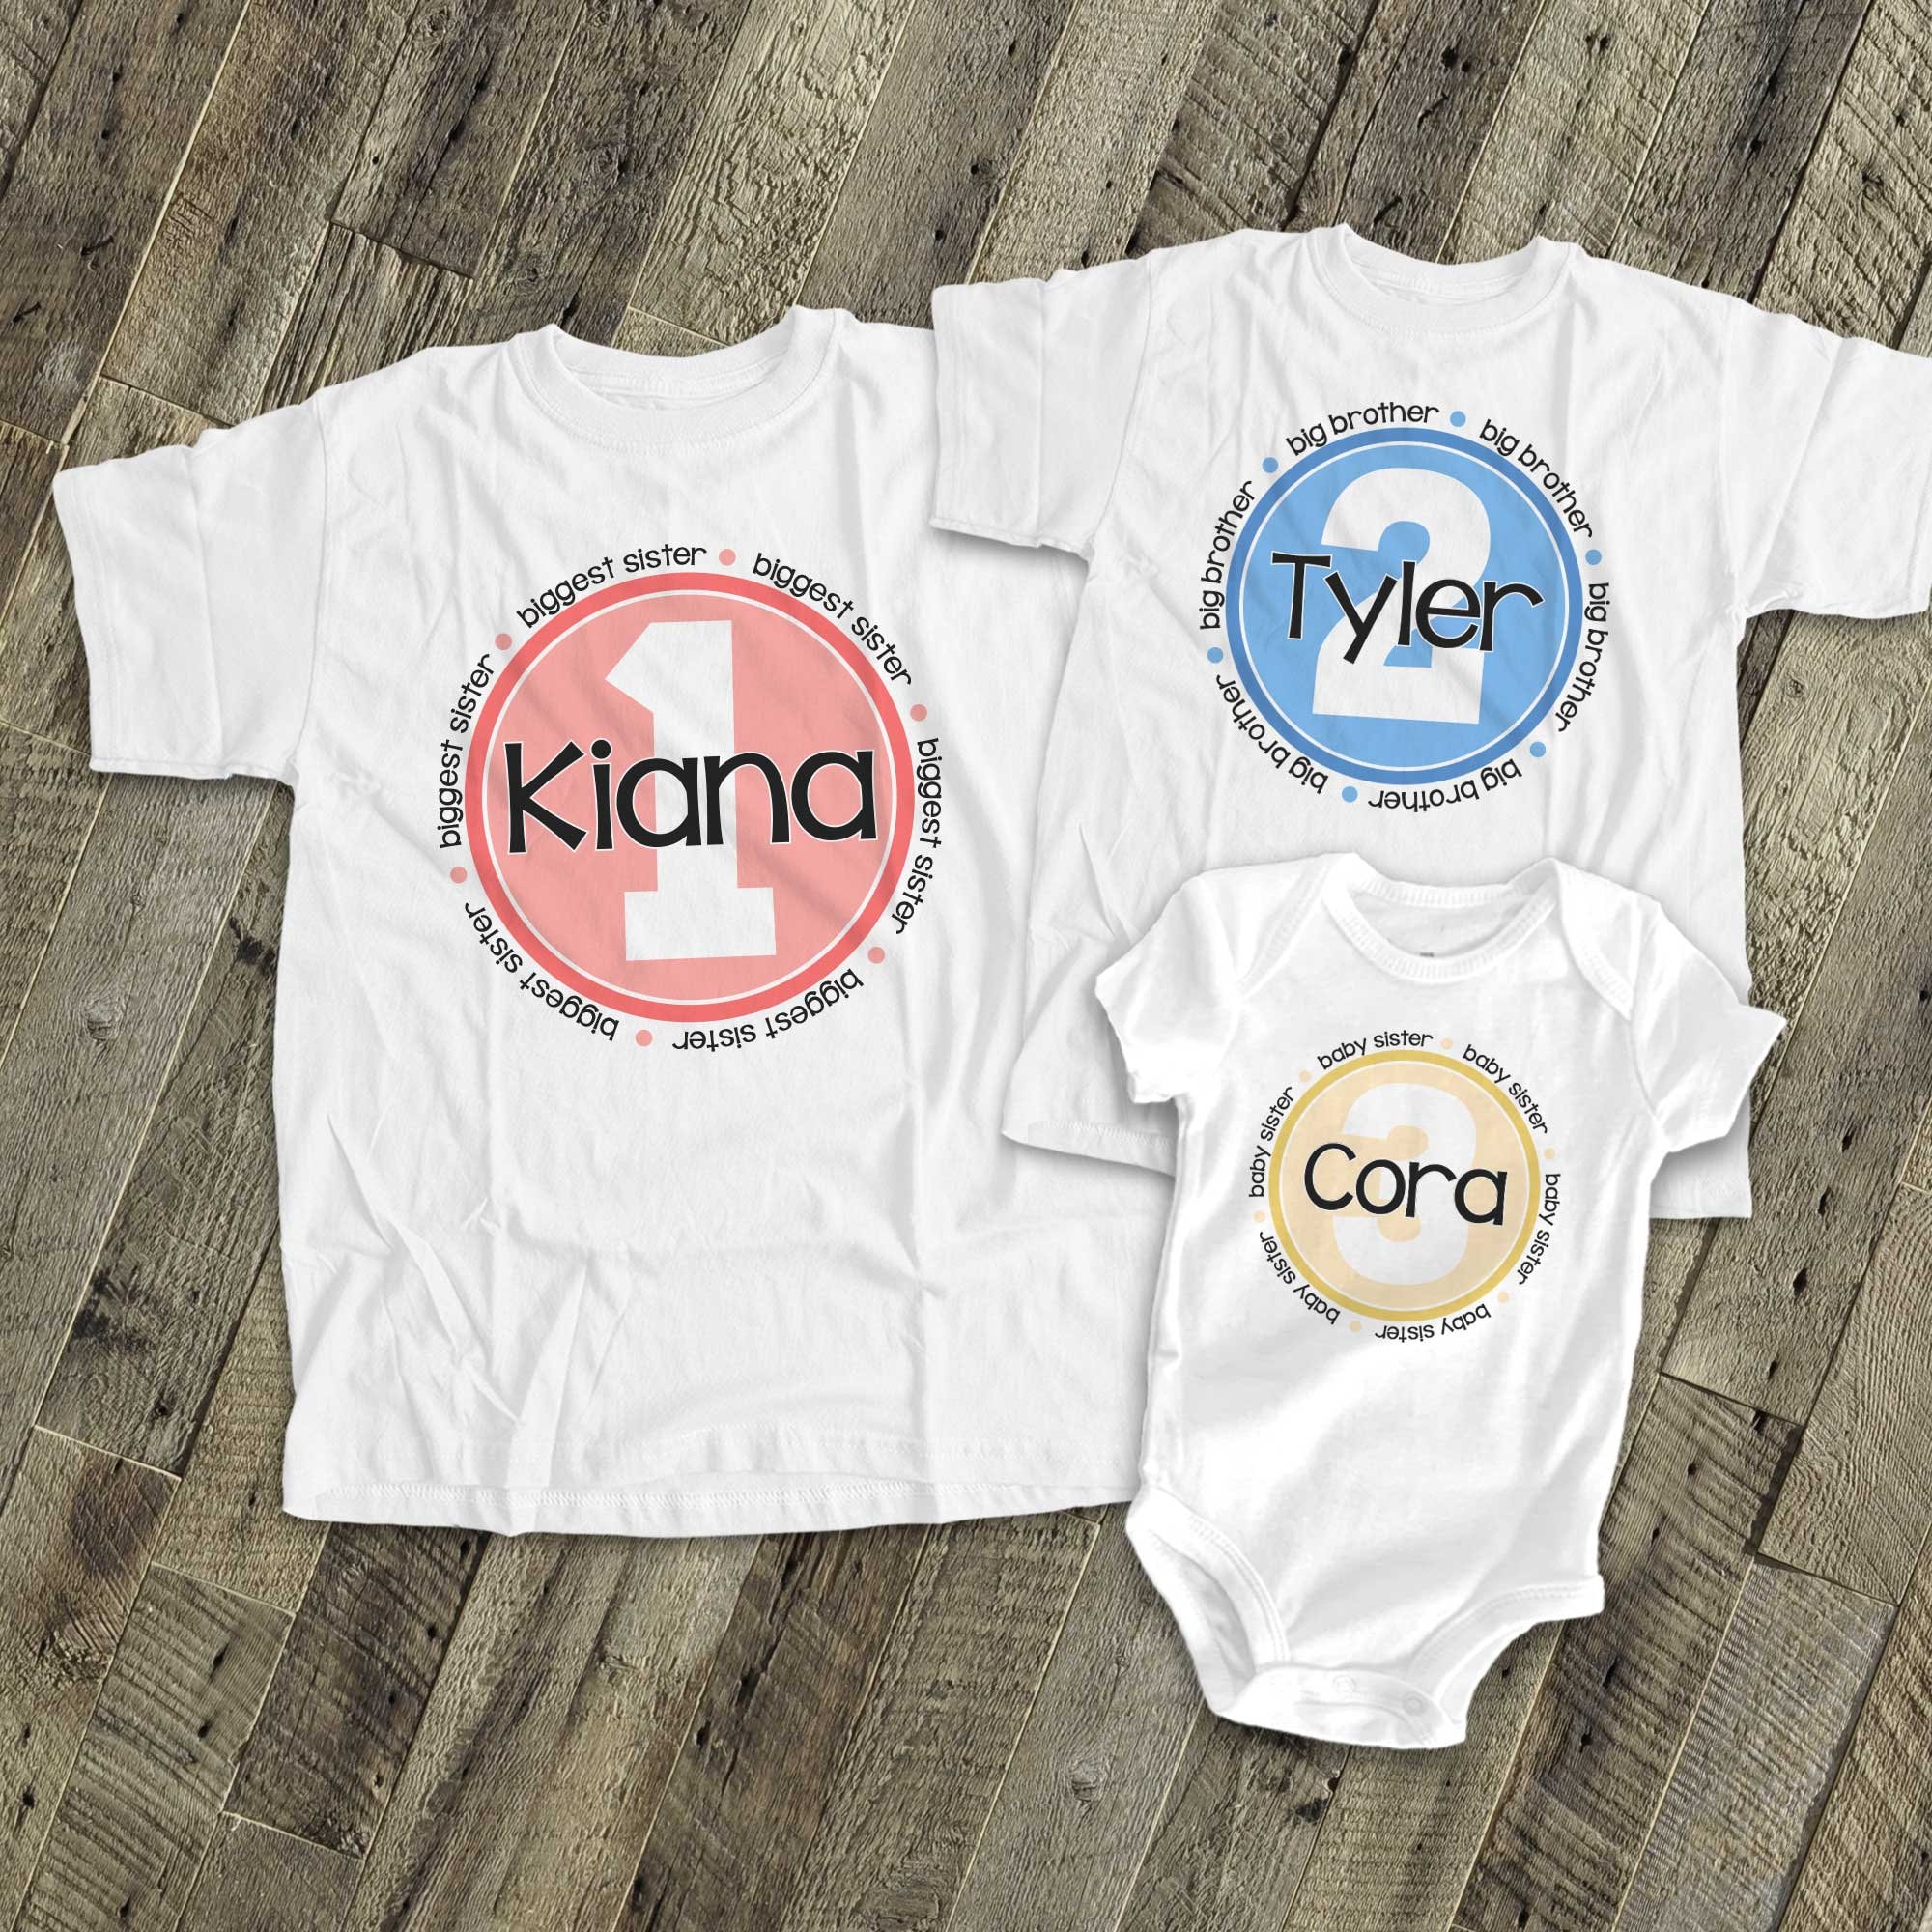 Kids Matching Tees Plaid Big Bro Grey Onepiece or Tshirt Youth Toddler Big Brother Shirt Baby BigLittle Brother Sibling Shirts